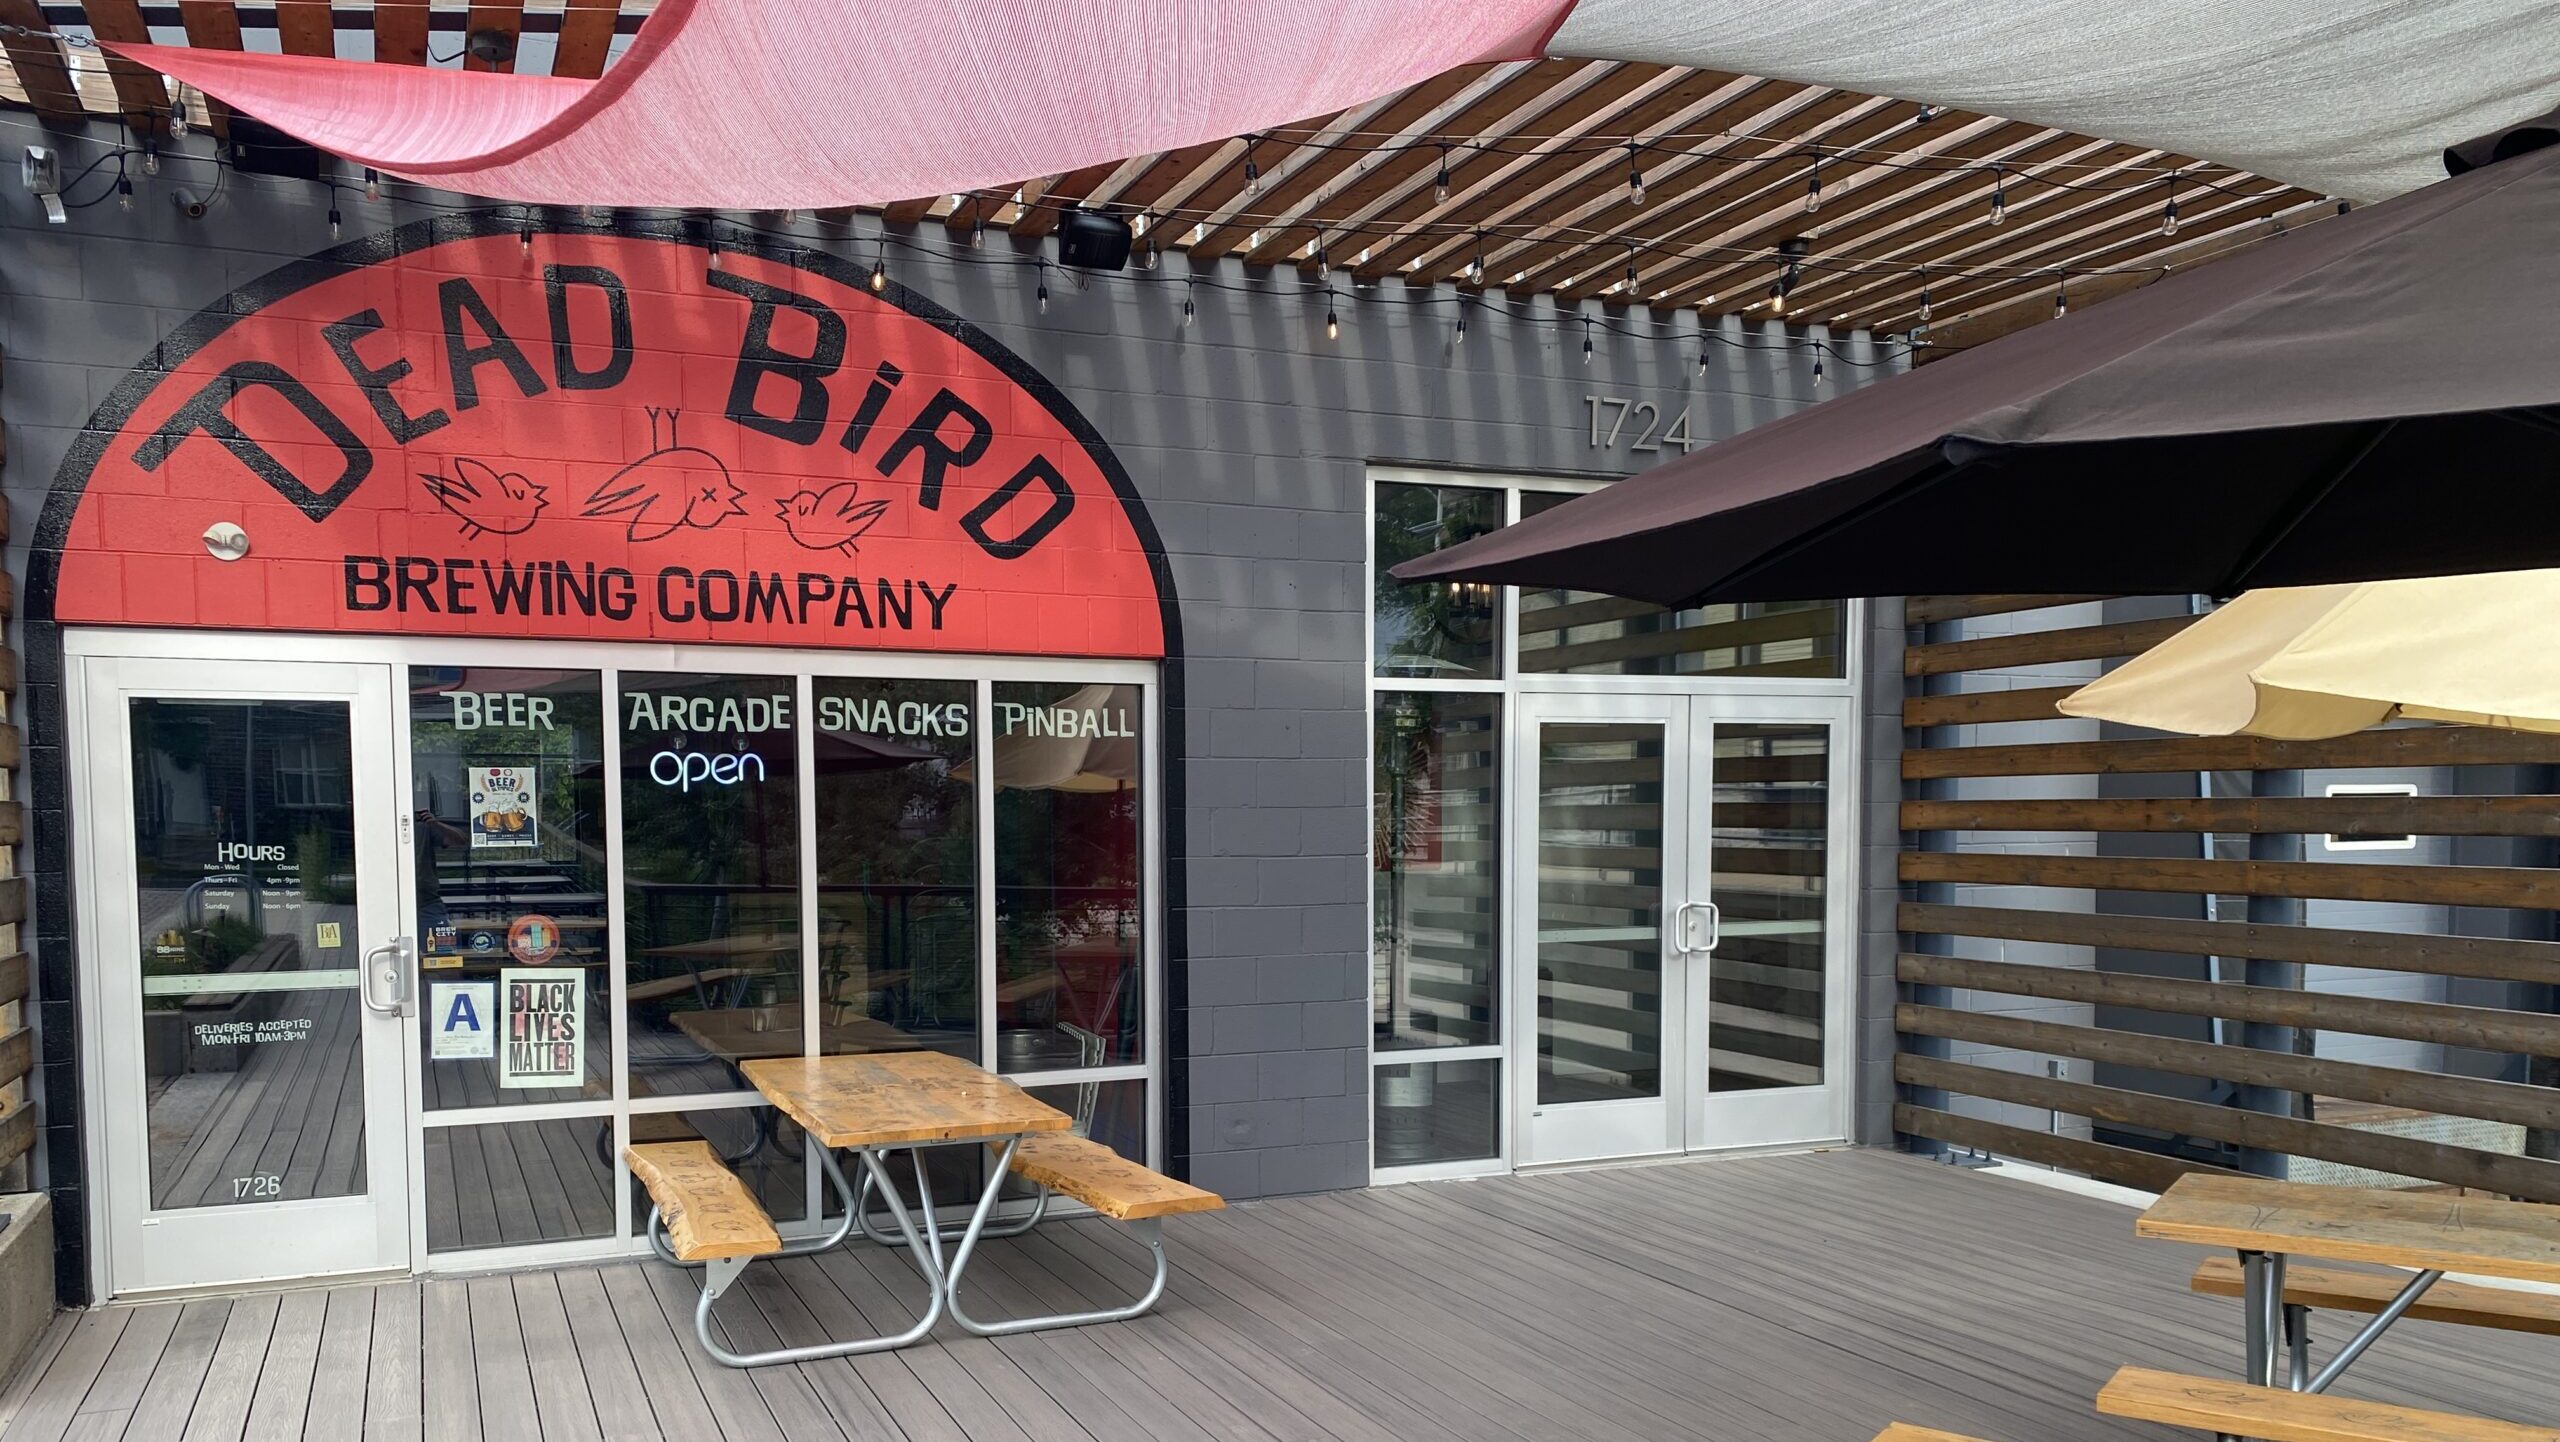 Exterior view of Dead Bird Brewing Company's entrance with a red canopy providing shade for picnic tables below.